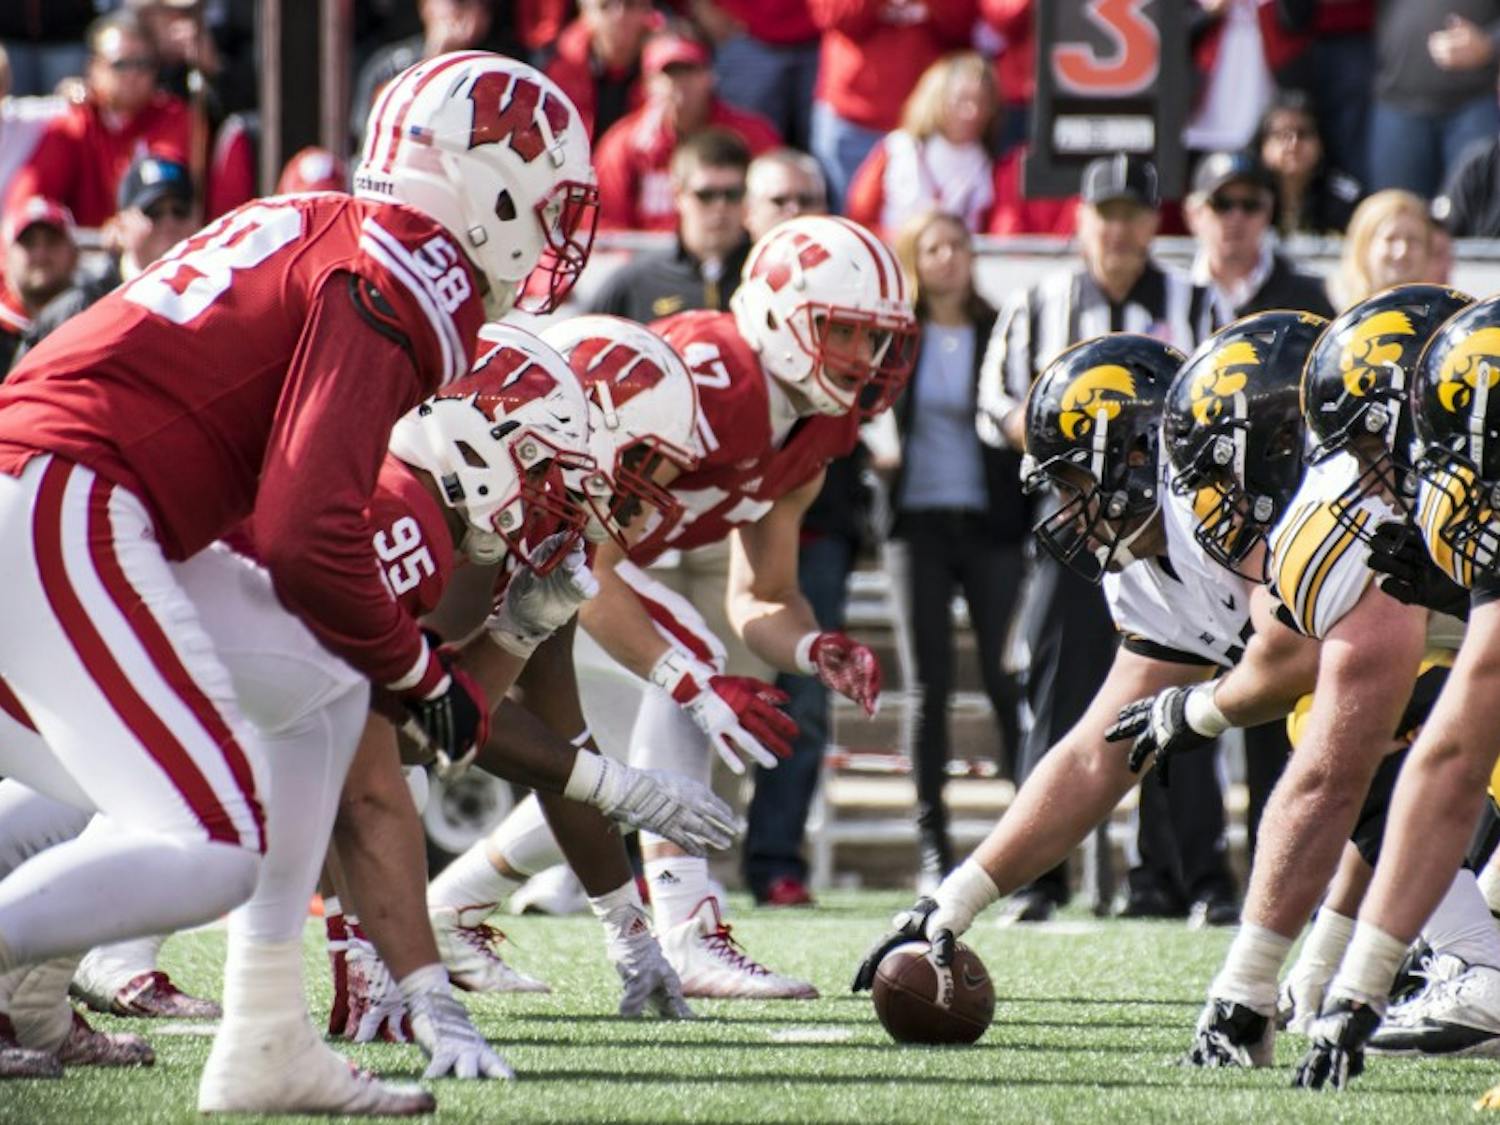 The Wisconsin–Iowa rivalry is typically decided by play in the trenches, an area where Wisconsin will need to bounce back after a poor performance against BYU.